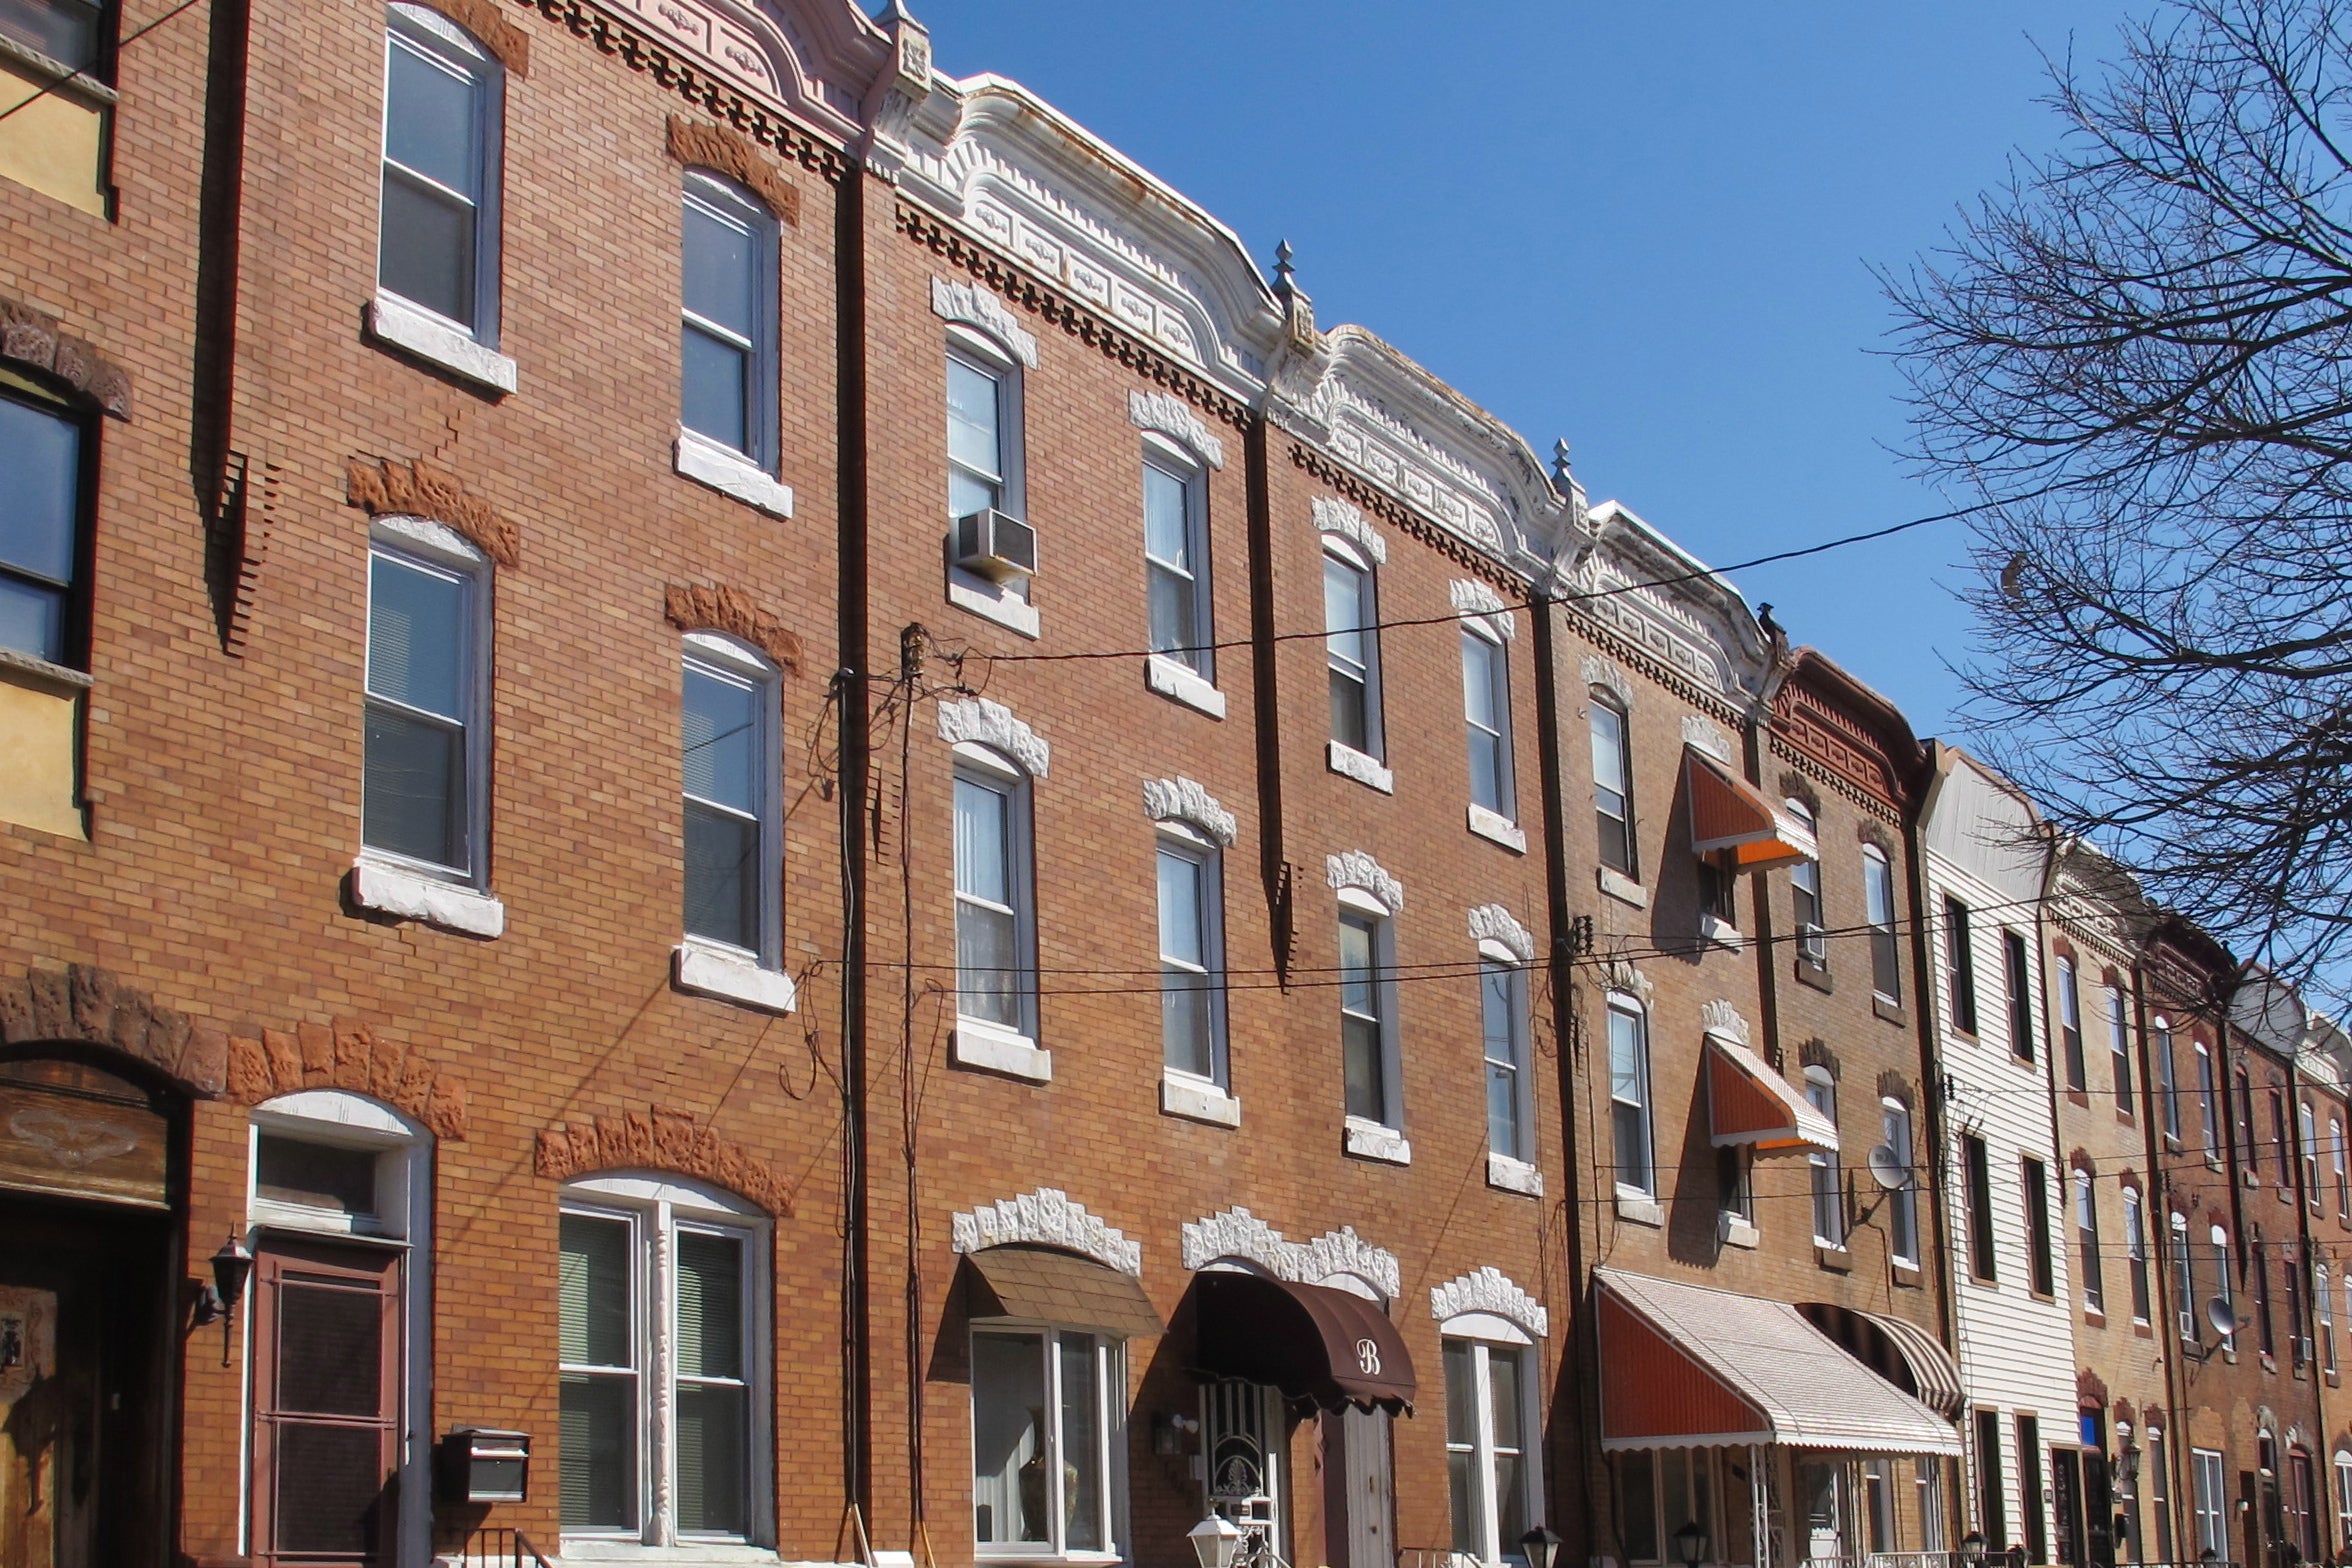 Rowhouses in Point Breeze